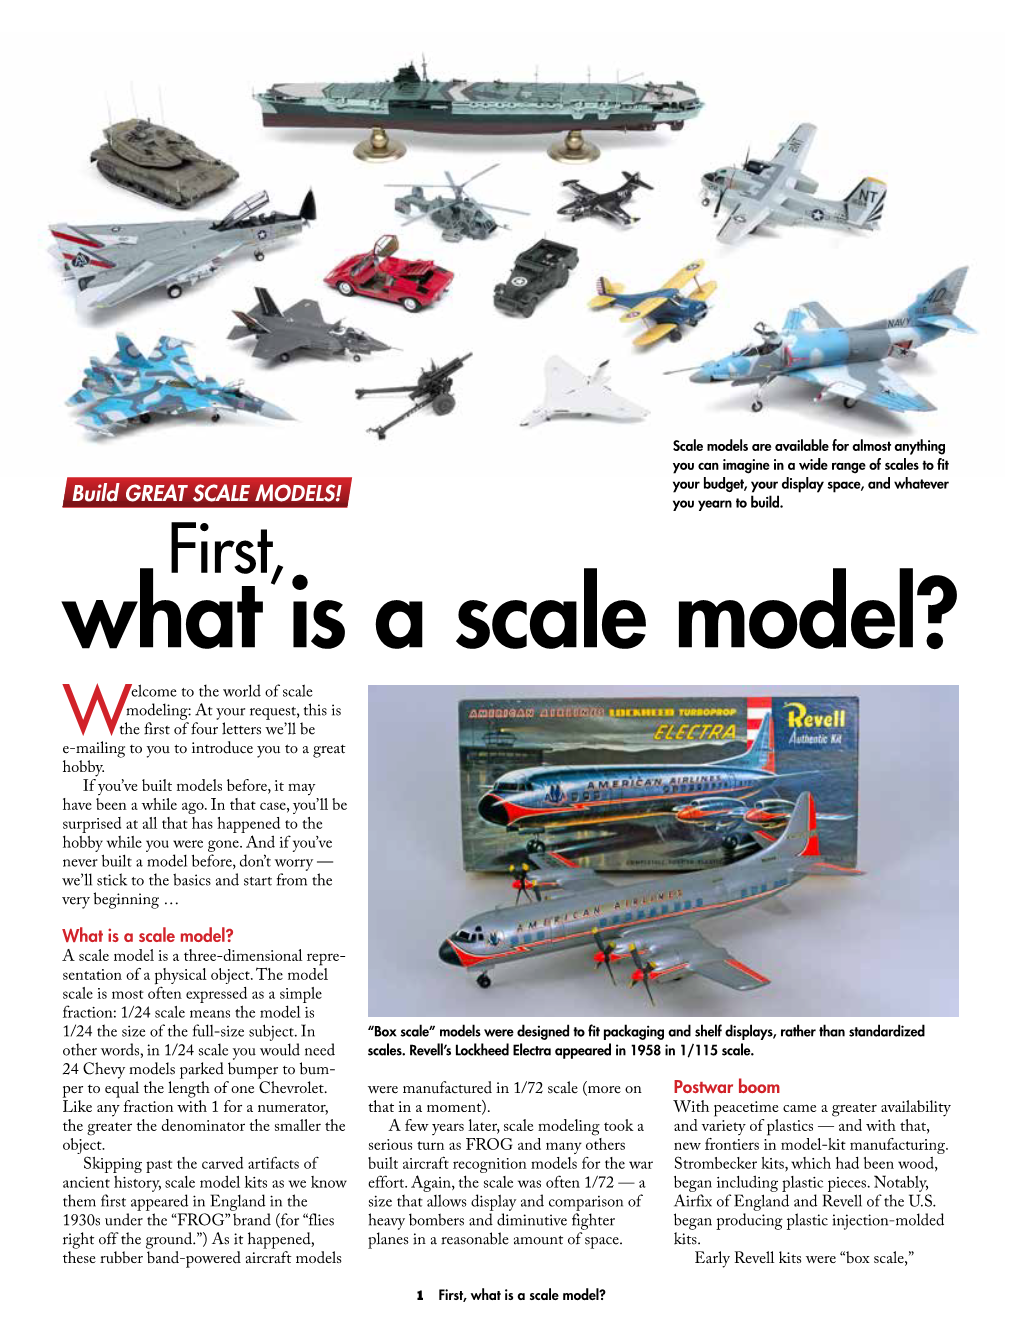 What Is a Scale Model?